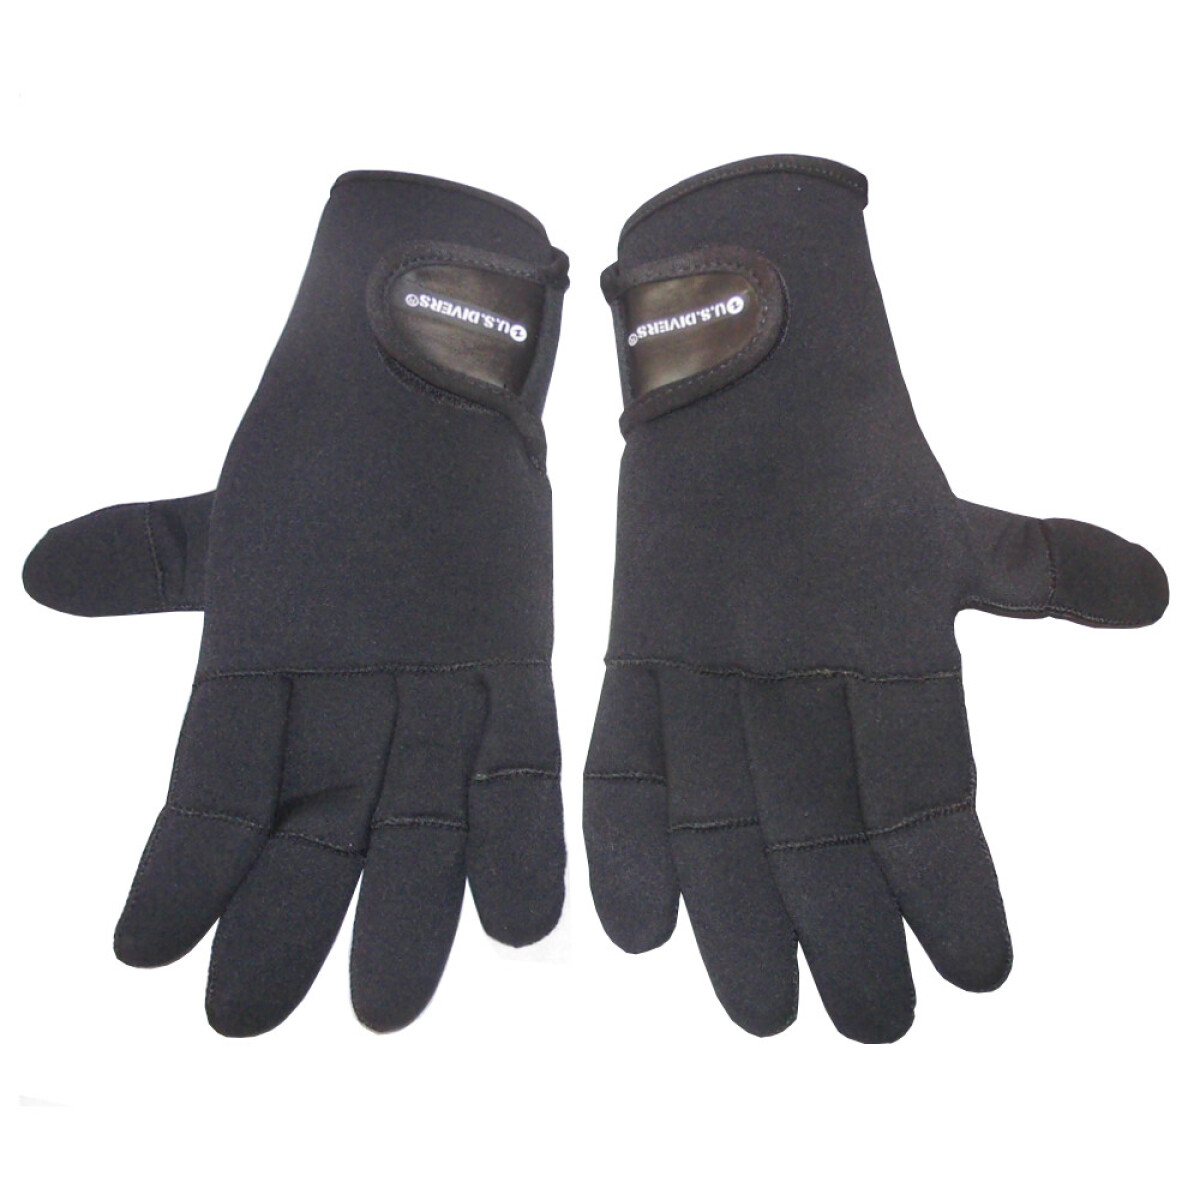 Usd - Guante Comfo-grip Sport 3MM Talle Xl -Color: Negro. - 001 